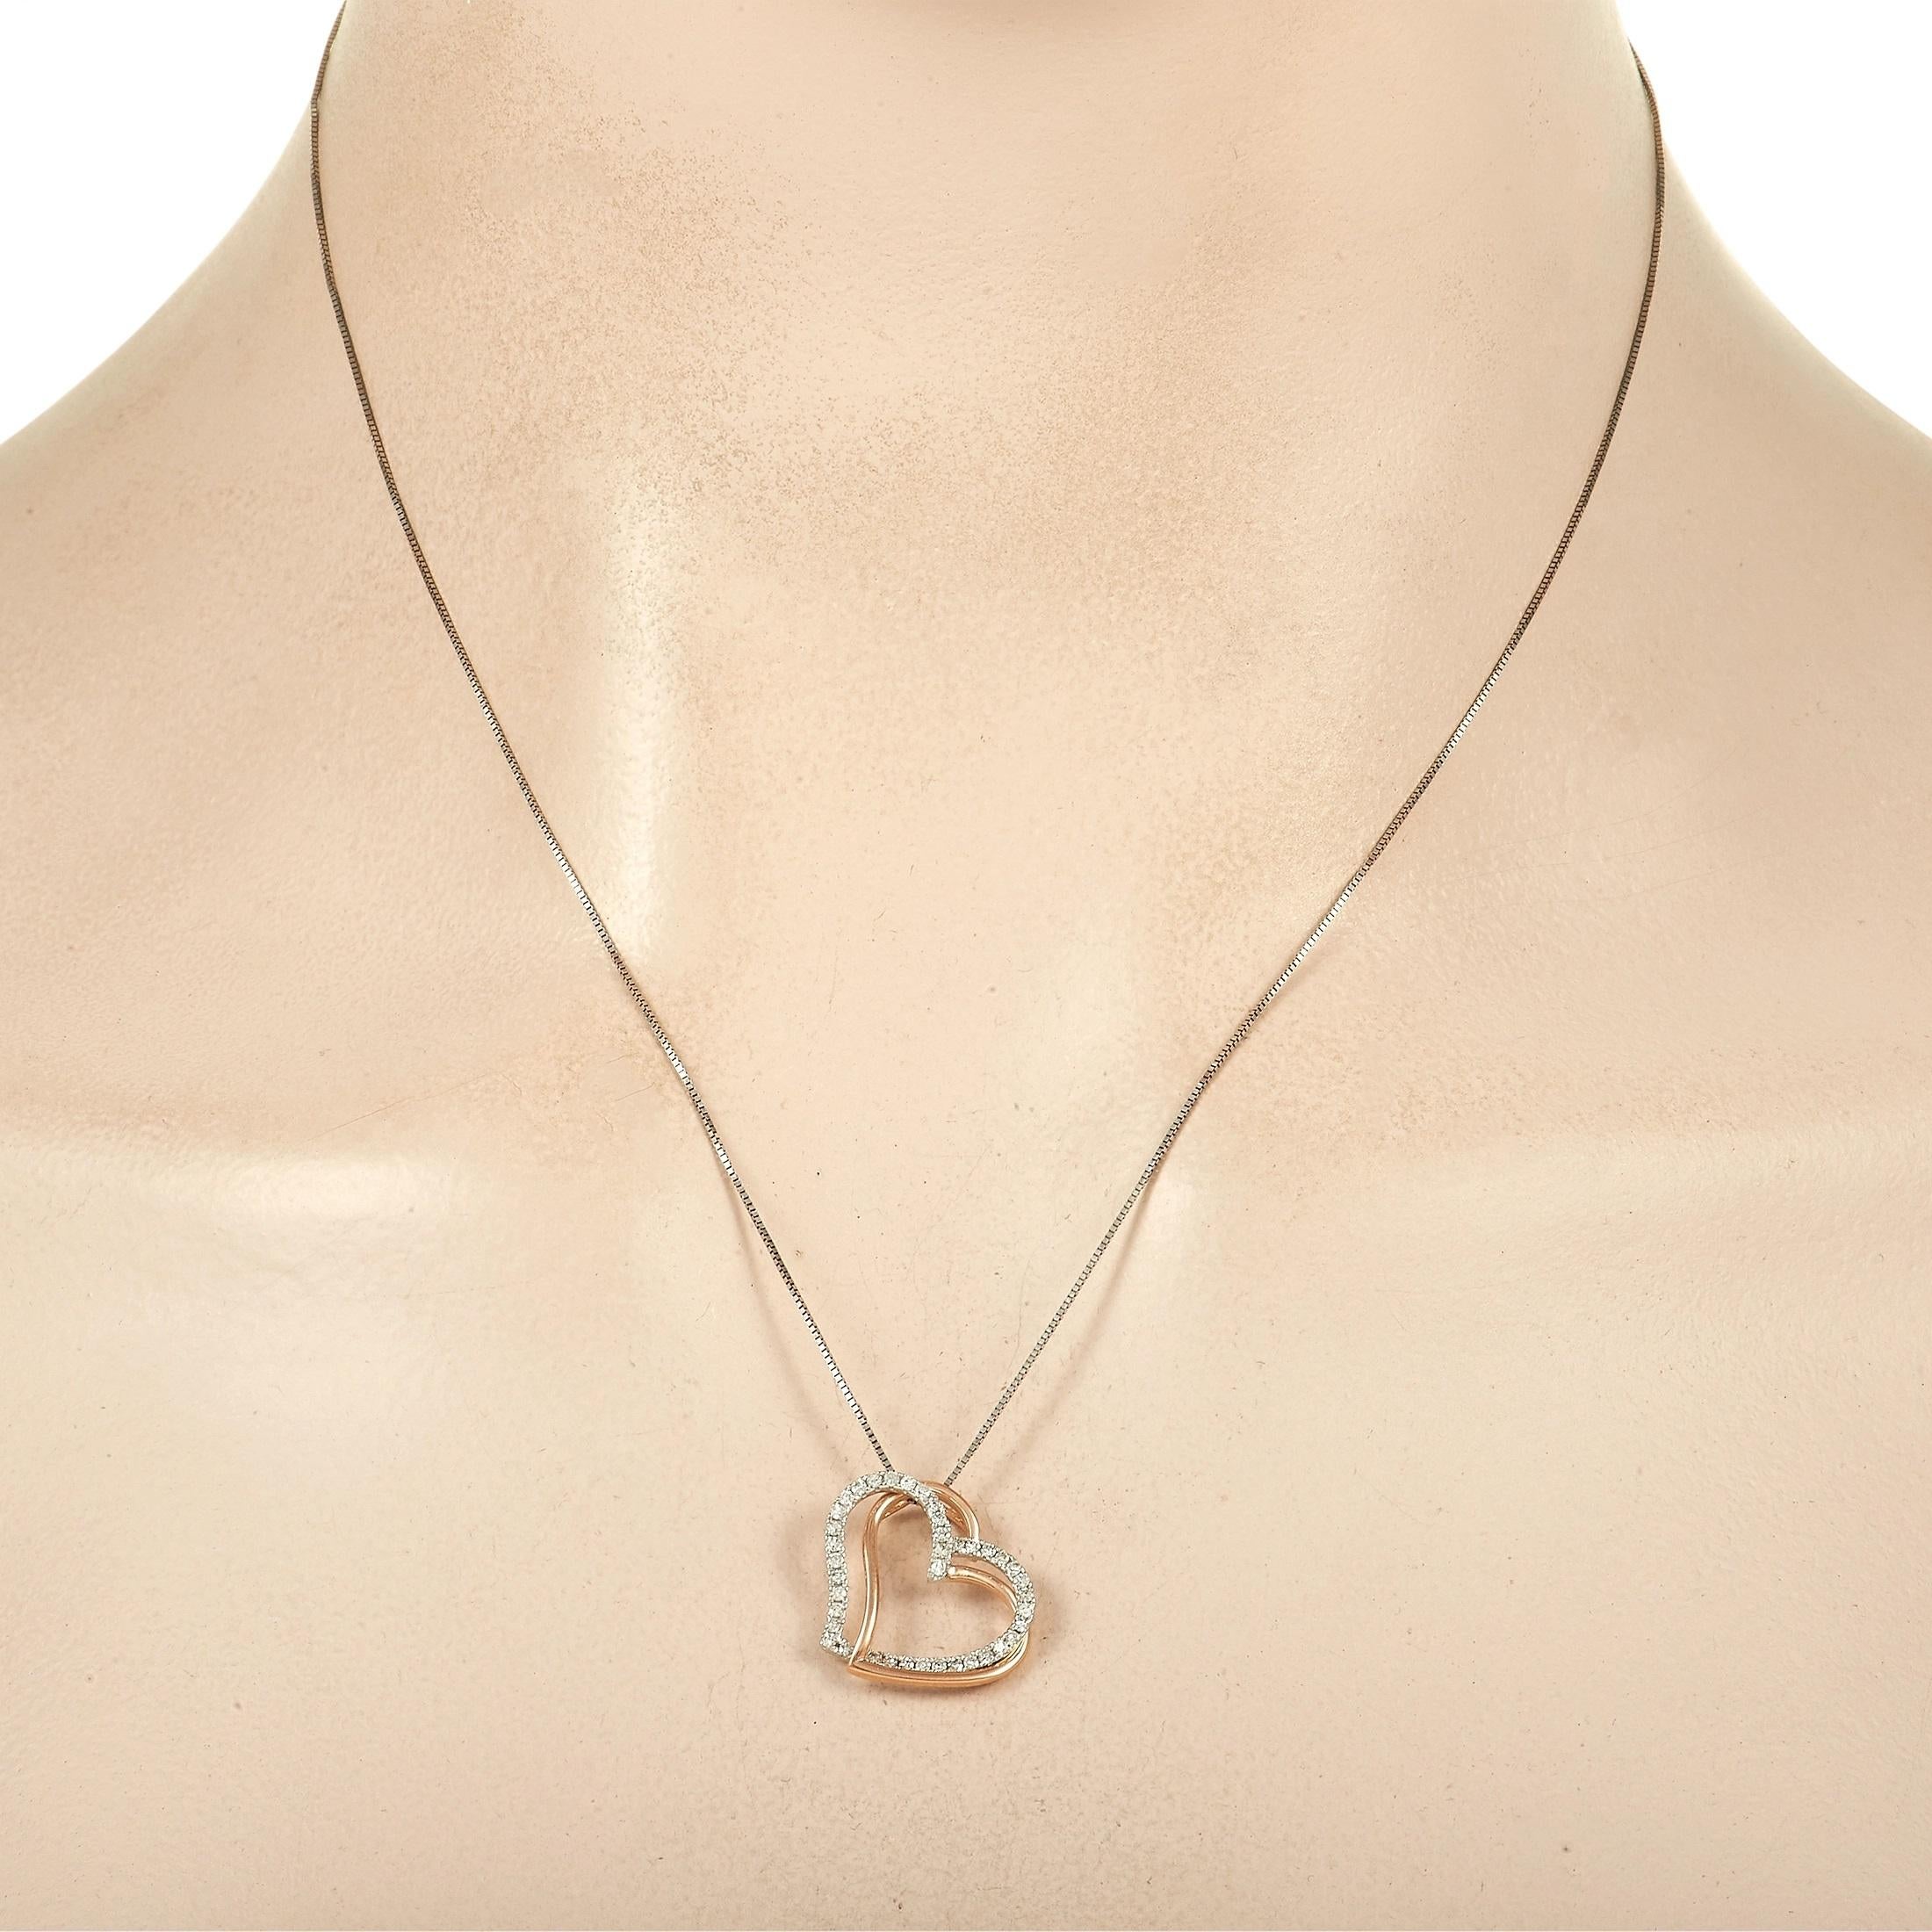 This elegant necklace is ready to serve as a stylish symbol of your love. Suspended from a sleek box chain measuring 17.5” long, you’ll find pendant measuring 0.75” long and 0.65” wide. It features a pair of heart motifs - one made from opulent 14K